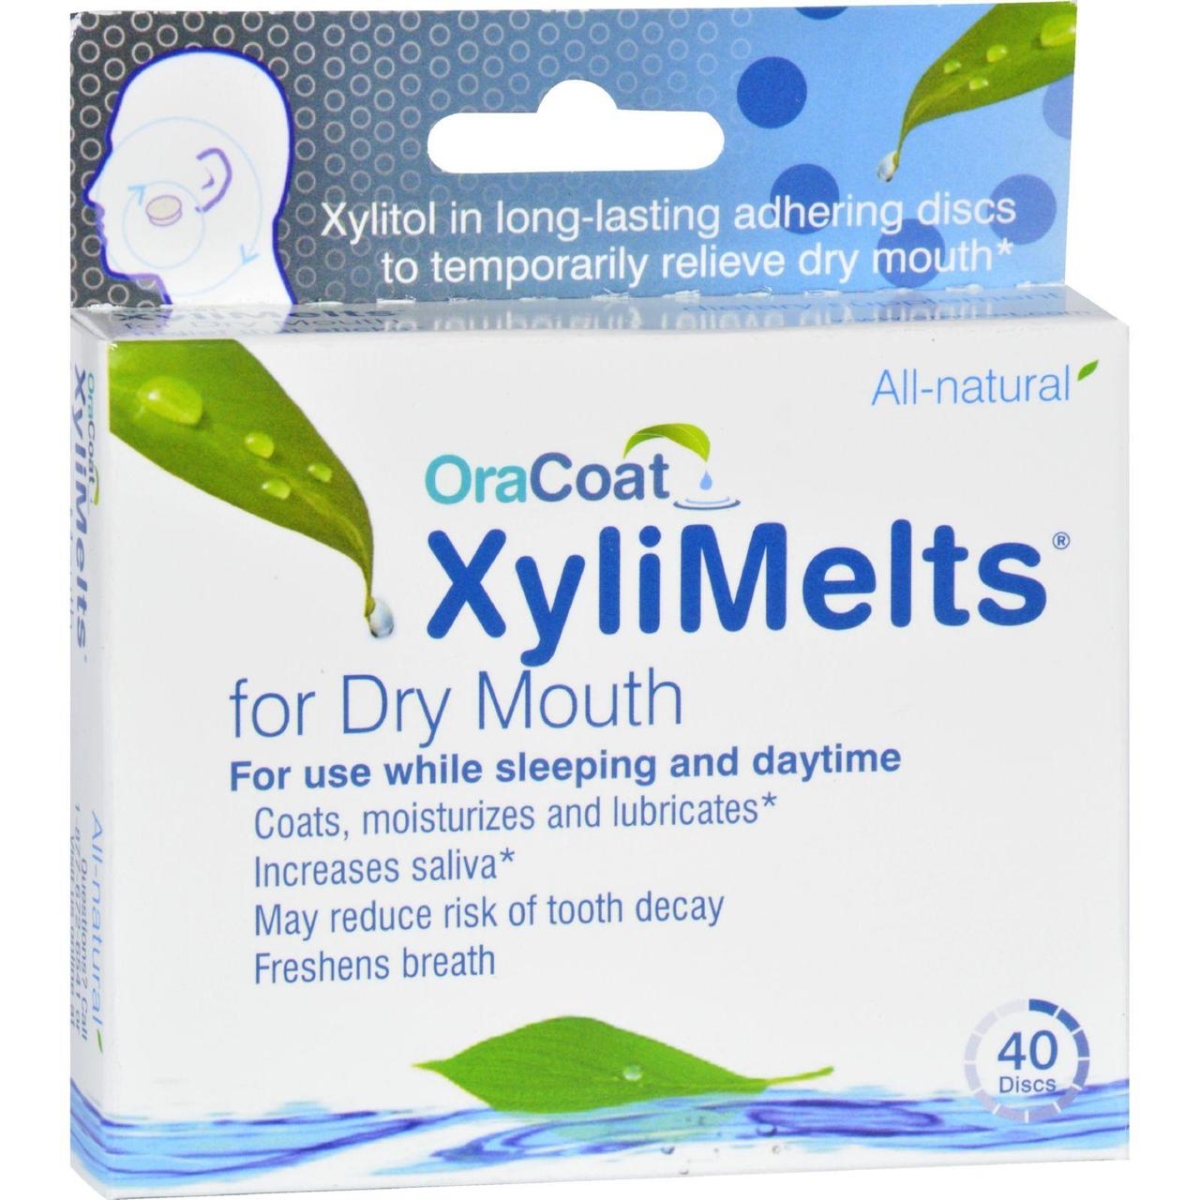 Hg1085307 Xylimelts - Dry Mouth Regular, 40 Count